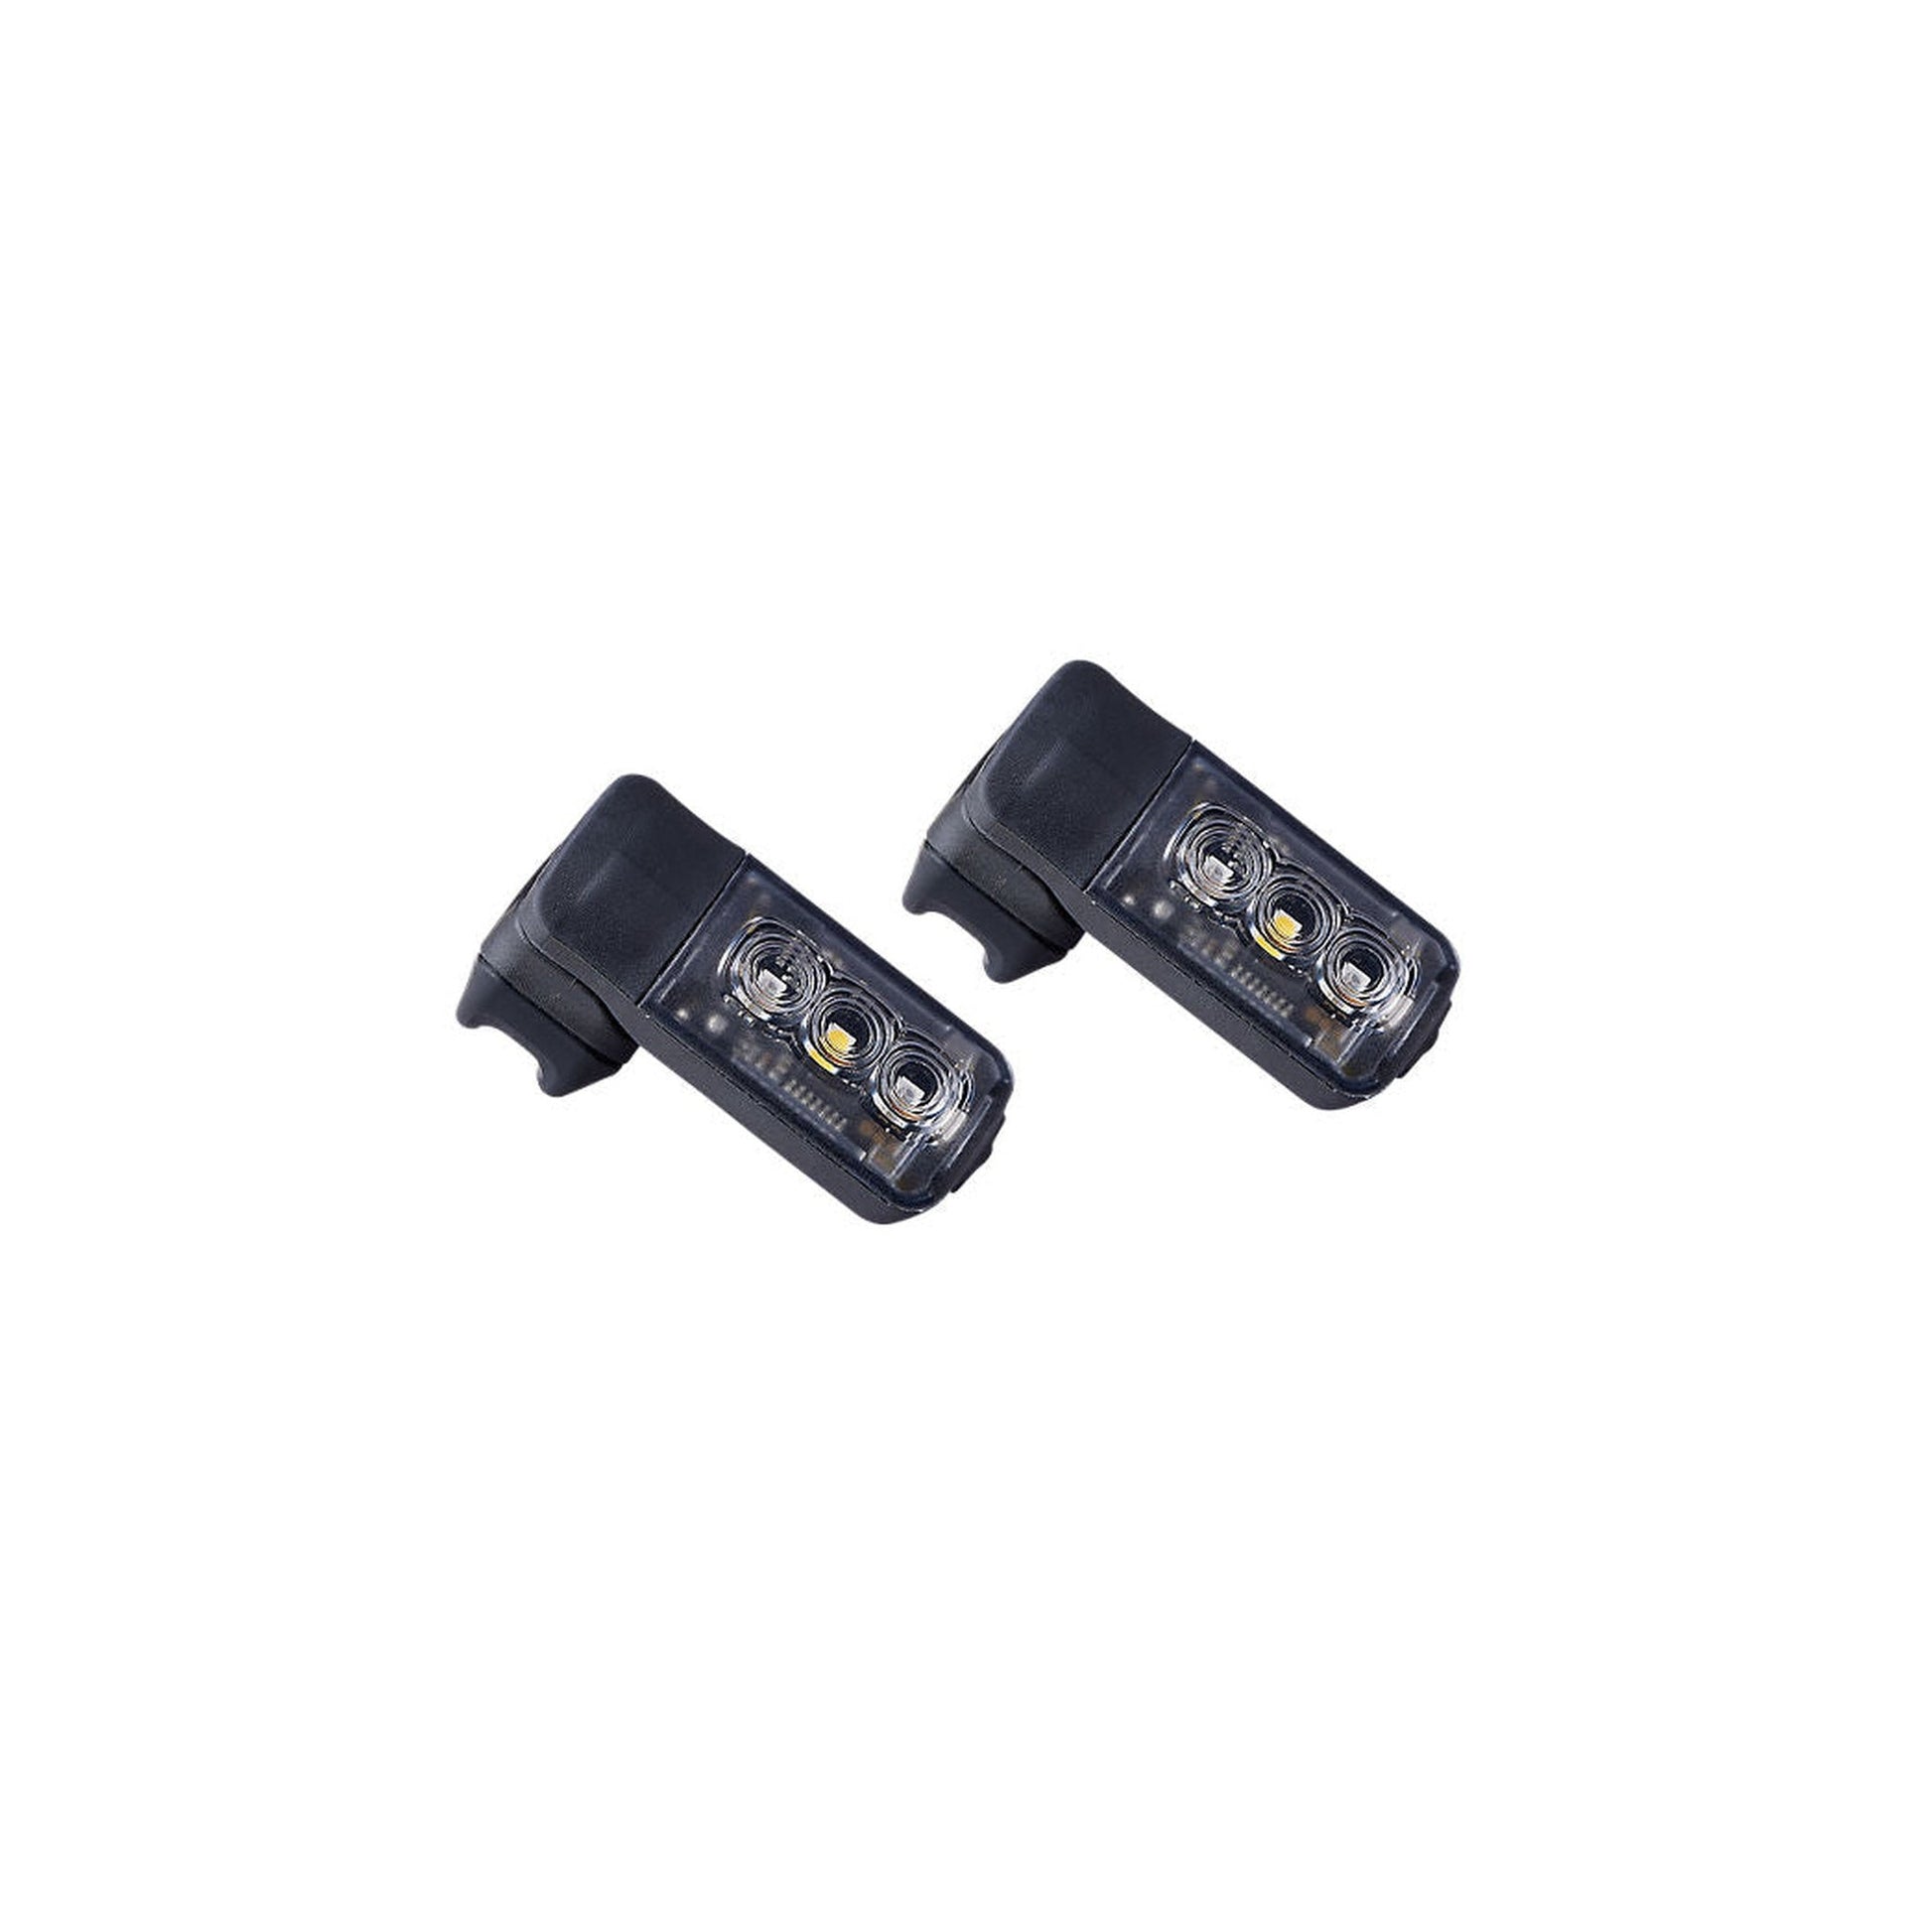 Stix Switch 2-Pack | completecyclist - With the Stix Switch 2-Pack, your lighting options are endless. How? The Stix Switch features the ability to switch between red and white modes with a simple,